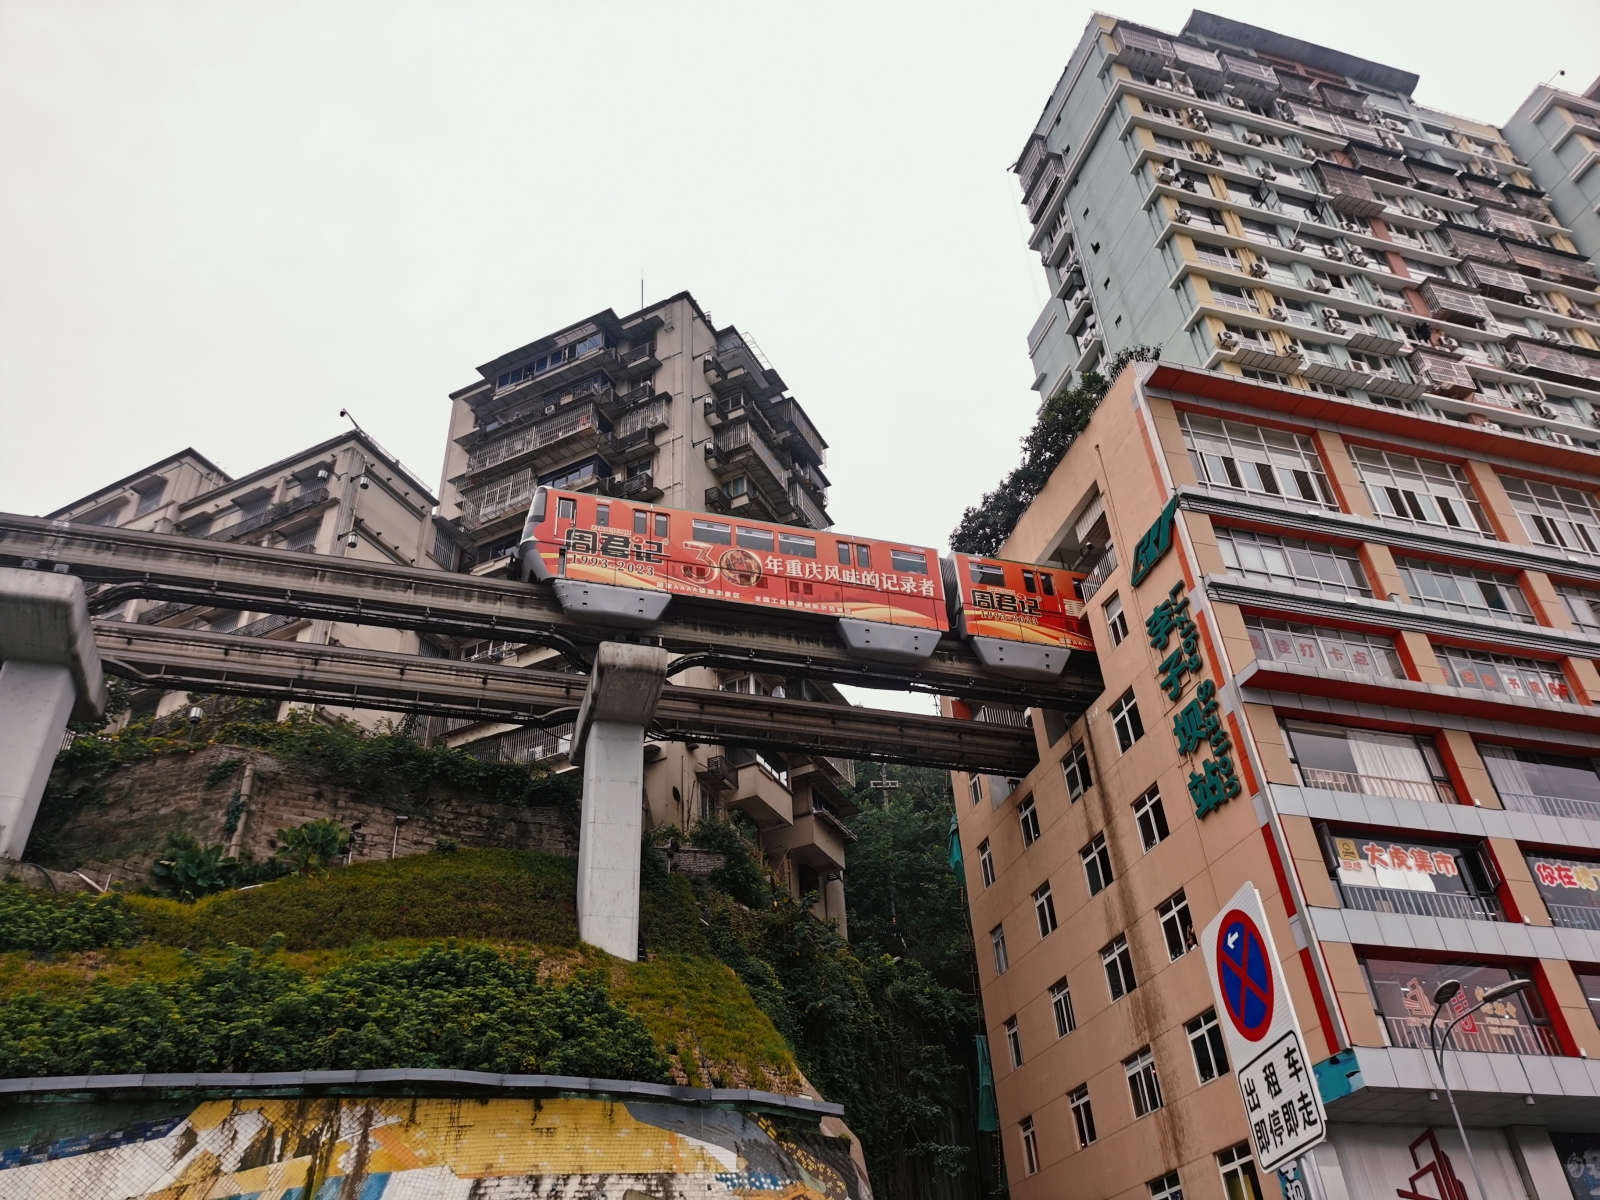 A monorail passenger train goes through a residential building in southwest China's Chongqing, on August 24, 2023. /CGTN